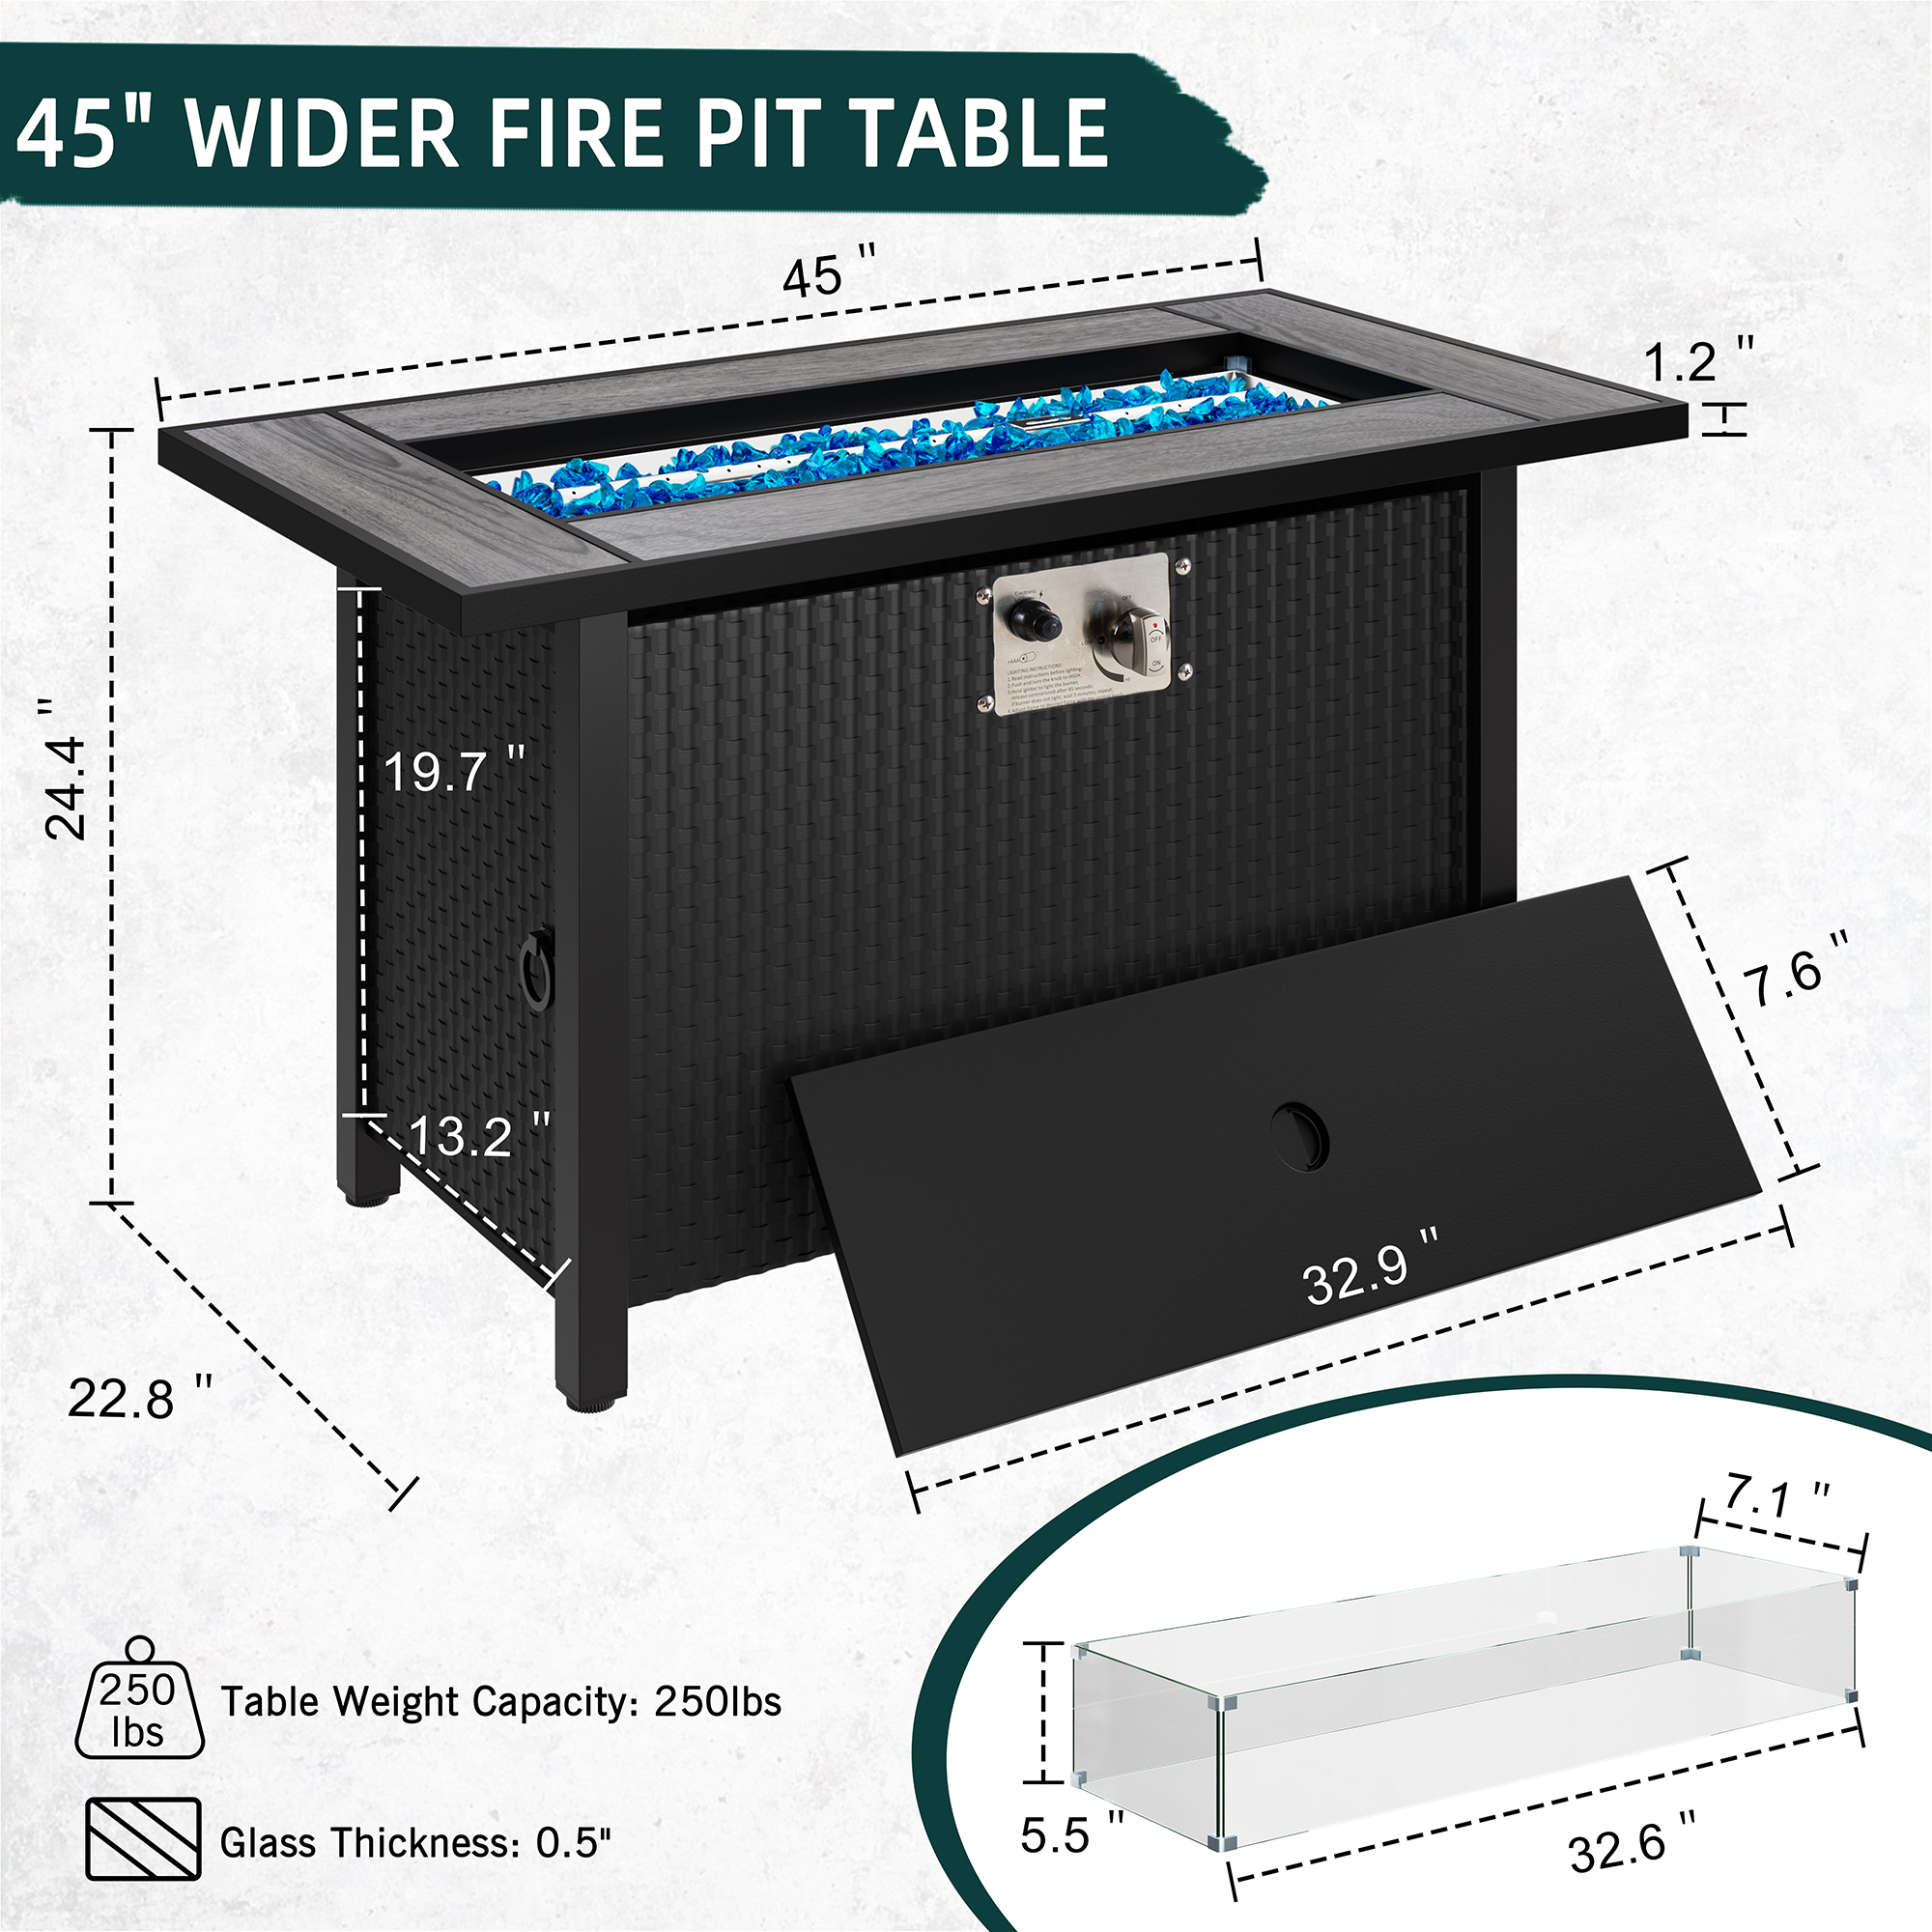 Walsunny 45" Propane Fire Pit Table 50,000 BTU Steel Gas Fire Pit with Removable Lid & Waterproof Cover and Tables - image 3 of 9